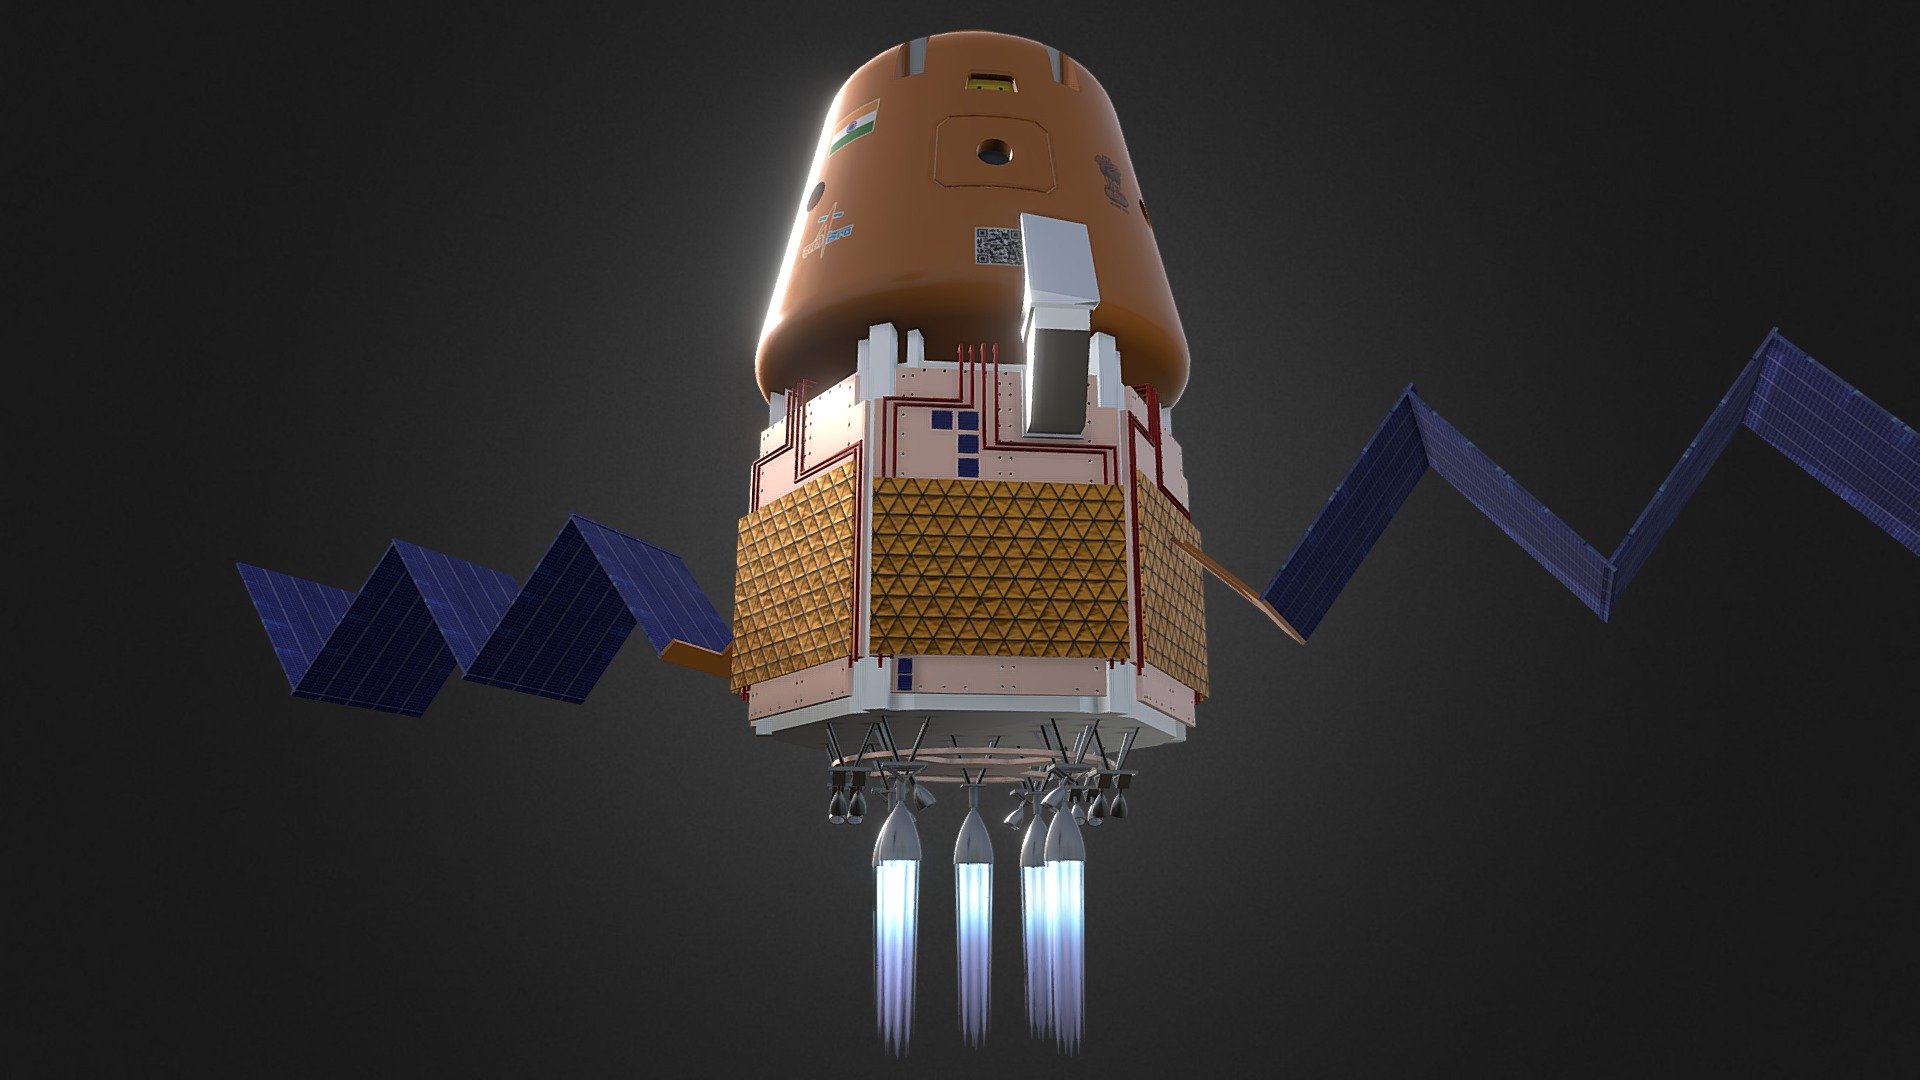 https://www.youtube.com/watch?v=Vjk5ZDacIE0&amp;ab_channel=JaizJose




ISRO Gaganyaan 3D model

Update 2.0 is here - more details added.

Crew Module

Service Module

Propulsion Module

Progress according to latest update from ISRO.

Details matched from Official ISRO references.

Please comment form Suggestions and Next model you want to see.
 - ISRO Gaganyaan -  Animated Solar Panel - Buy Royalty Free 3D model by the3dCartel 3d model